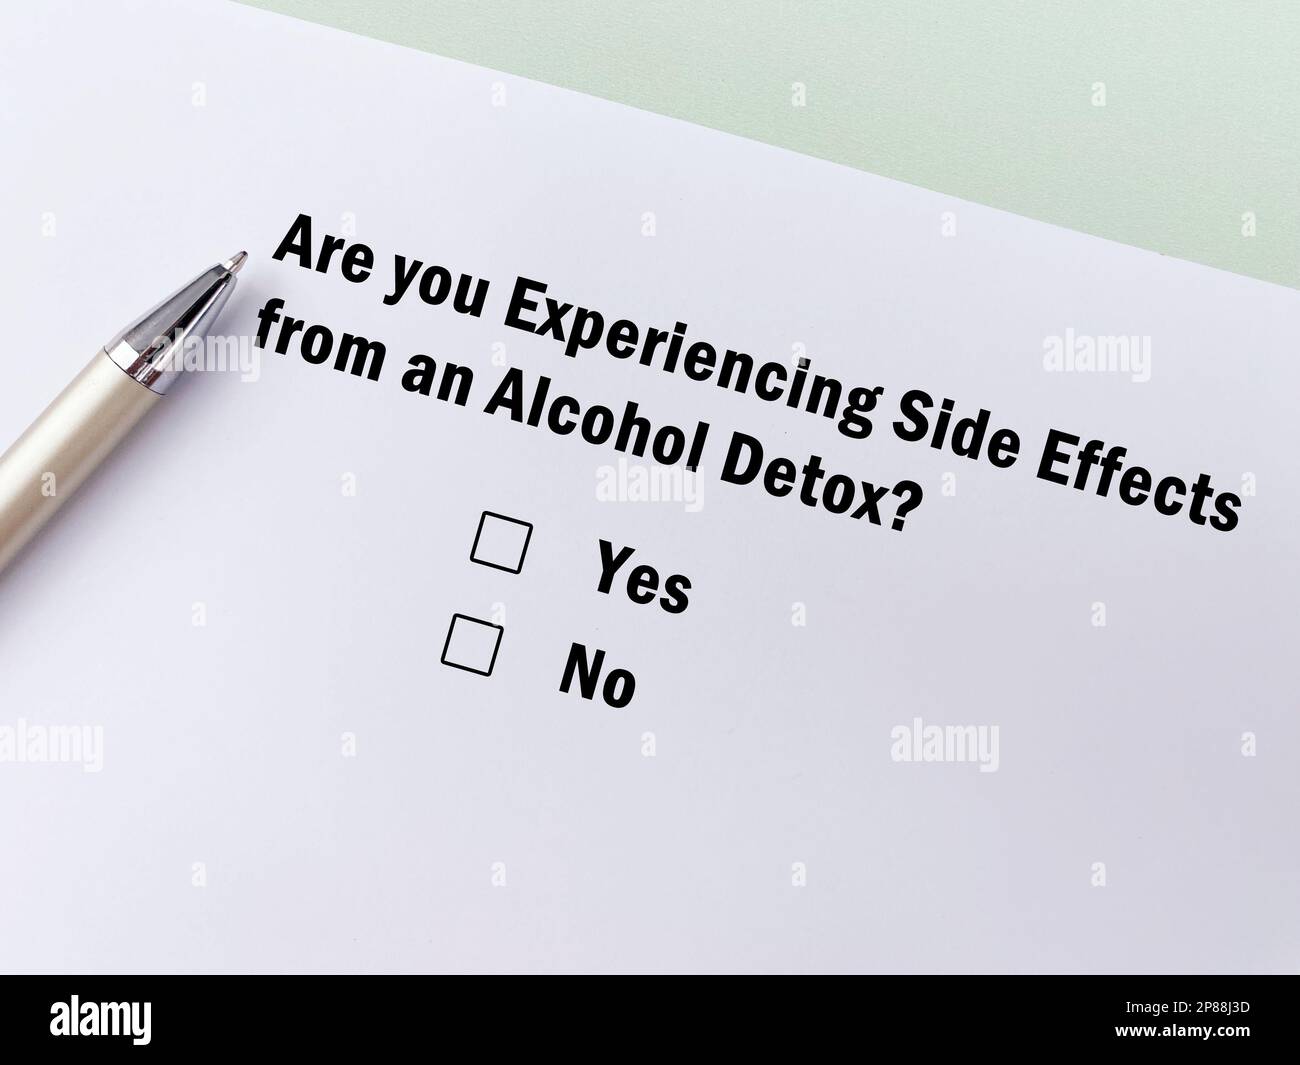 One person is answering question about side effects. She is experiencing side effects of alcohol detox. Stock Photo